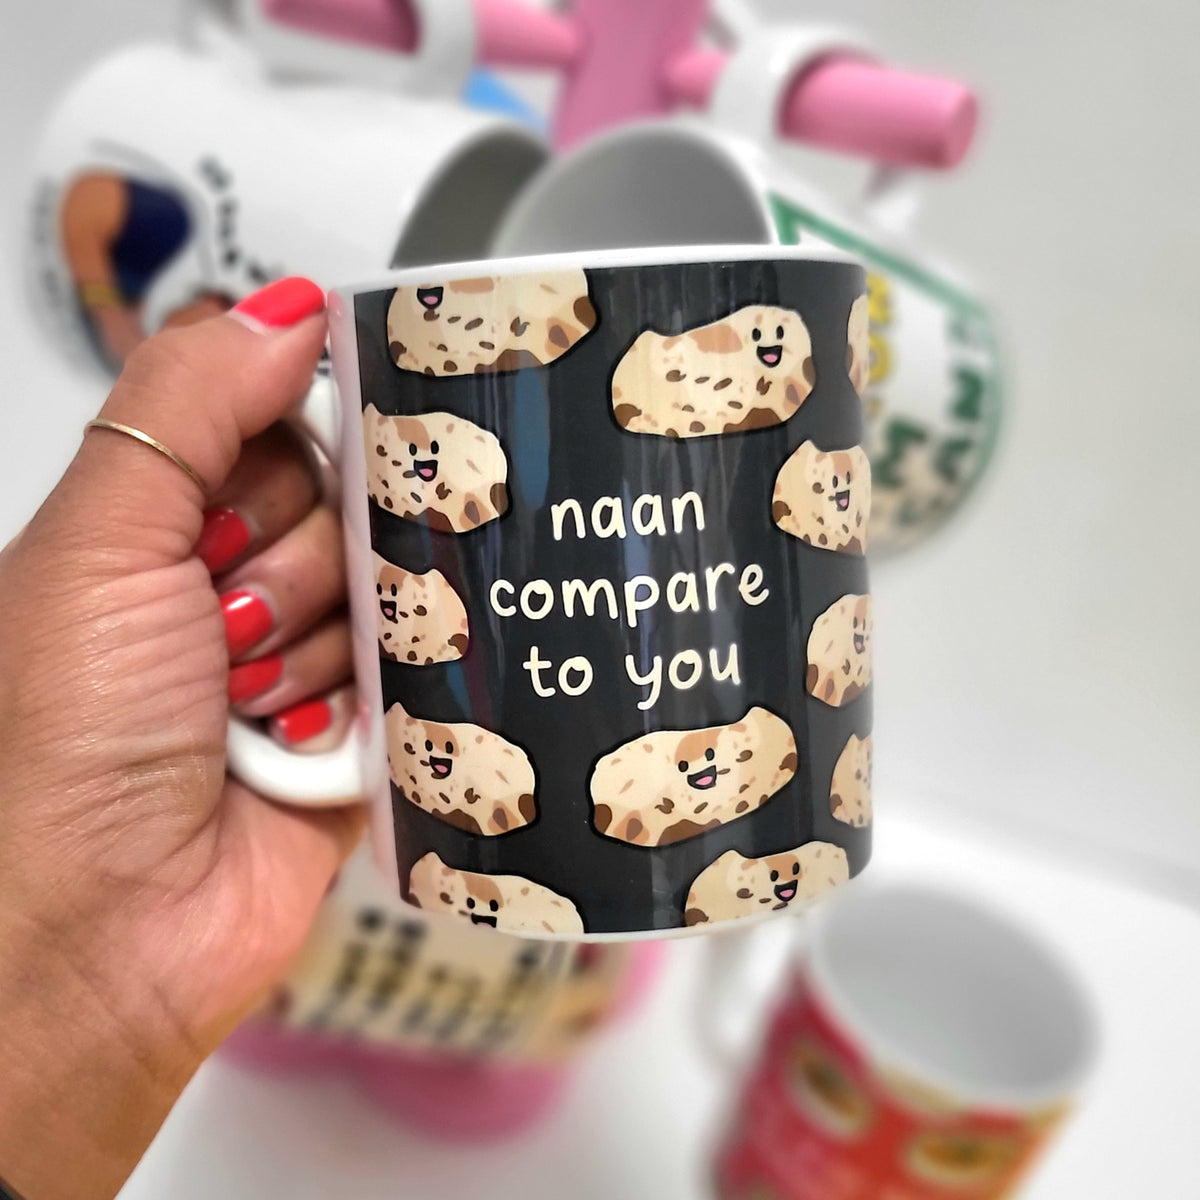 Naan Compare to You Funny Mug from penny black